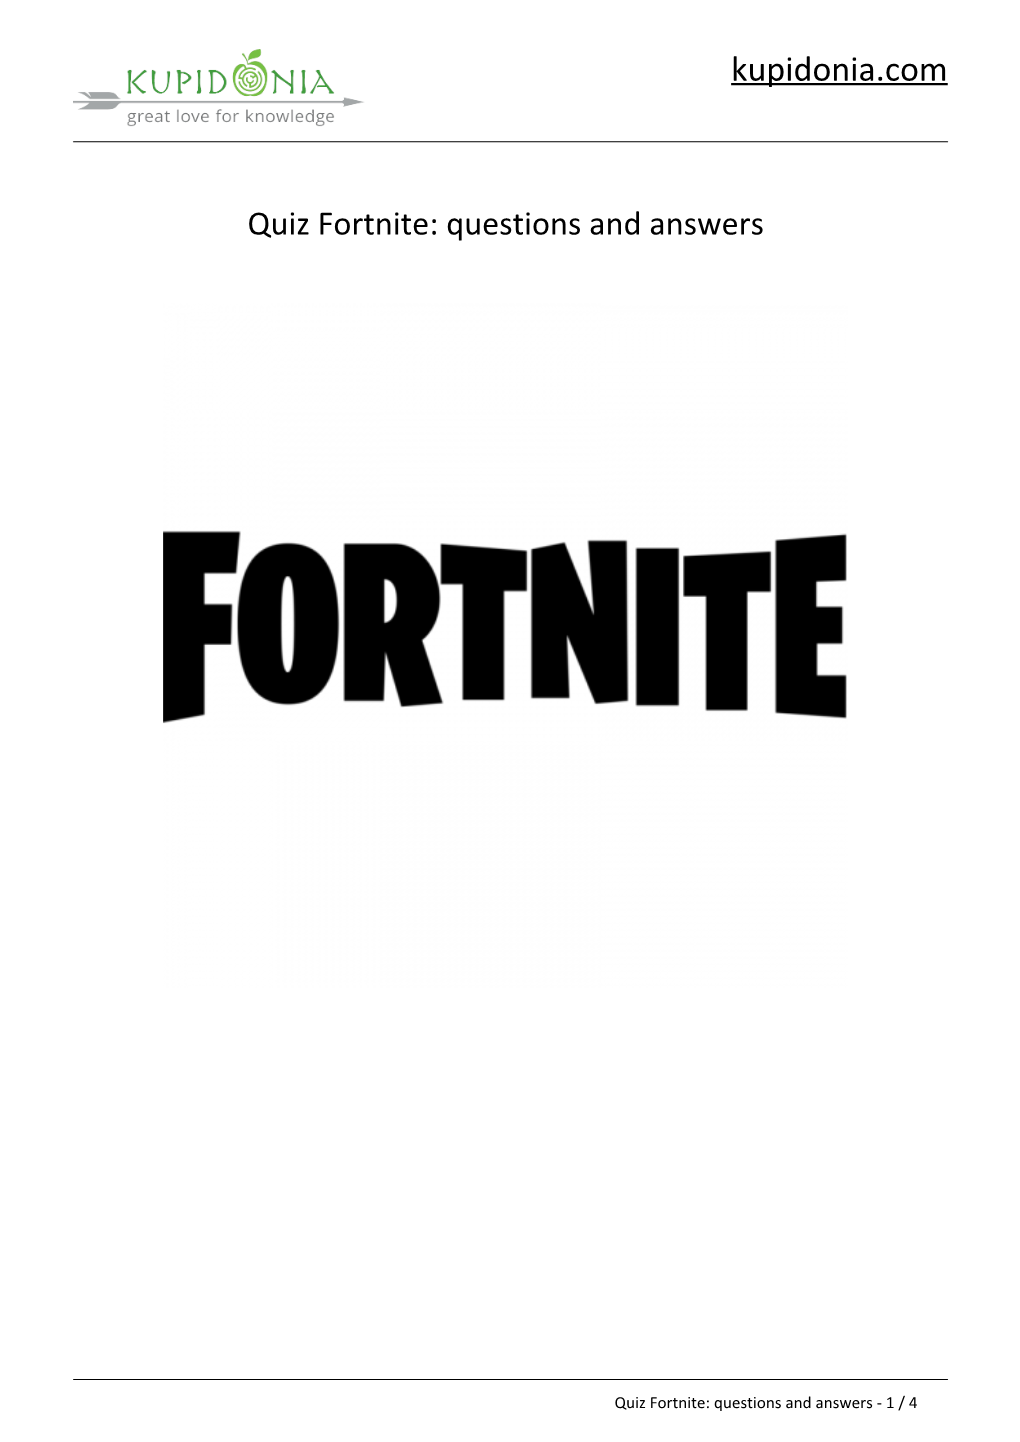 Quiz Fortnite: Questions and Answers